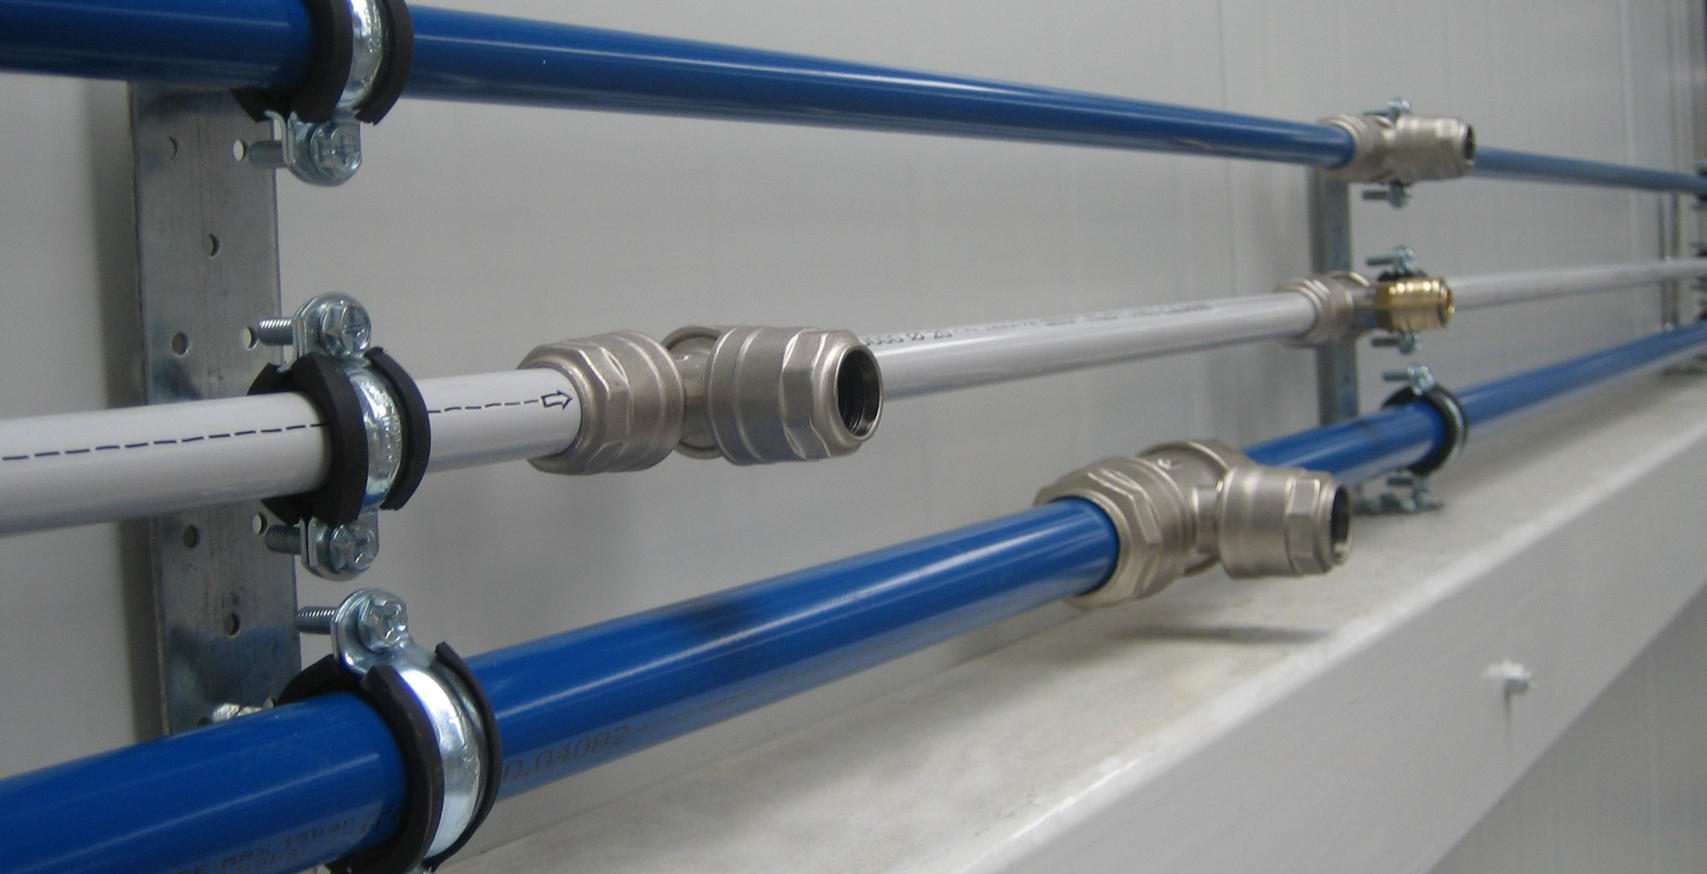 Infinity Air Piping System